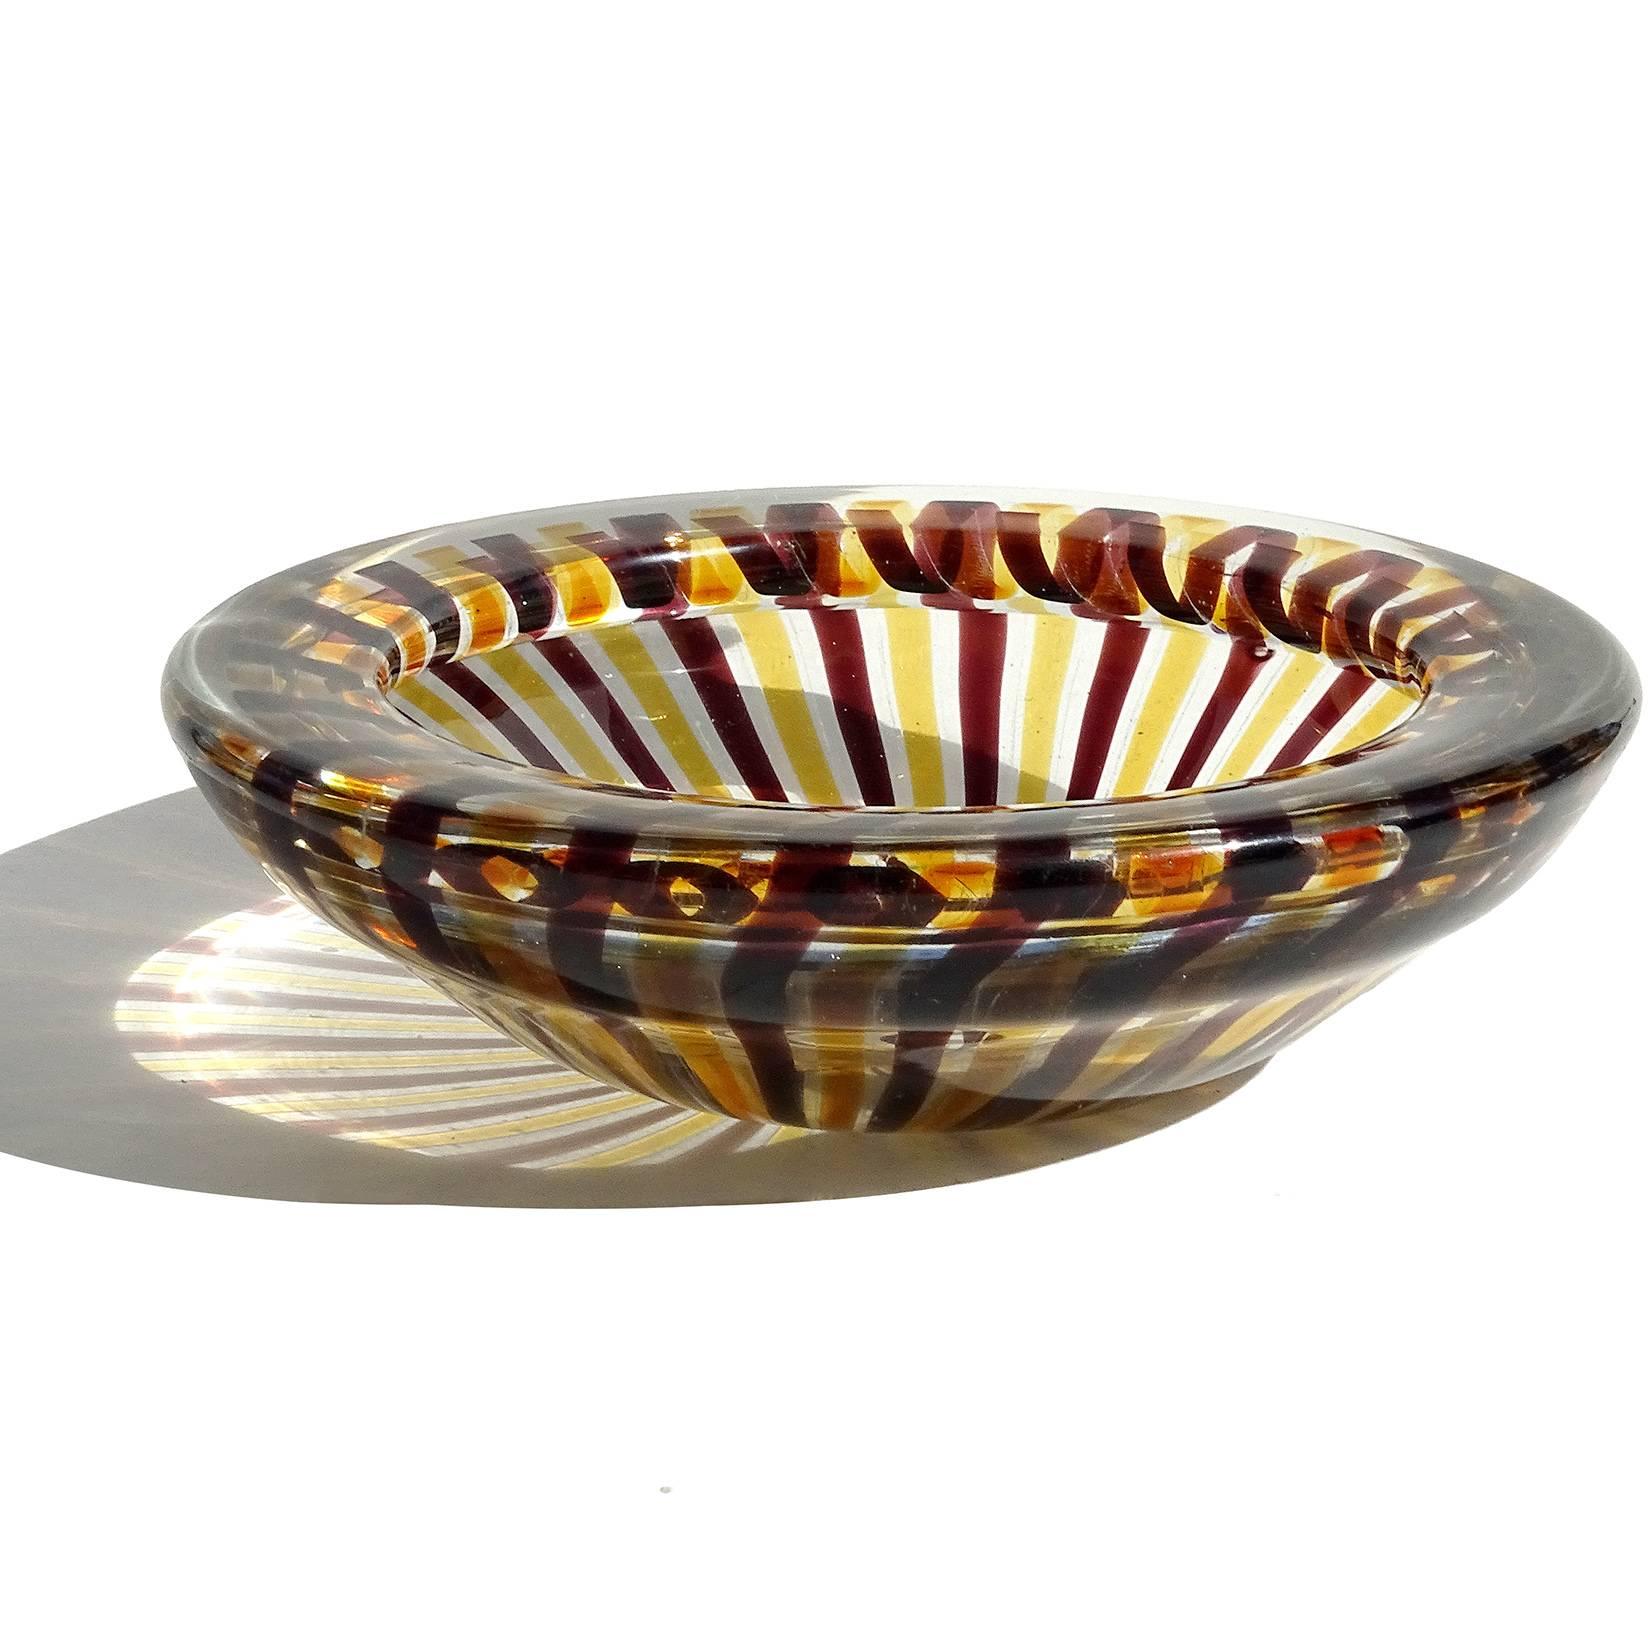 Beautiful Murano hand blown yellow and wine purple ribbons Italian art glass bowl.
Documented to the Fratelli Toso company. The piece has a folded over rim and pinwheel design. A beautiful statement piece for any table. Measures 7 1/2